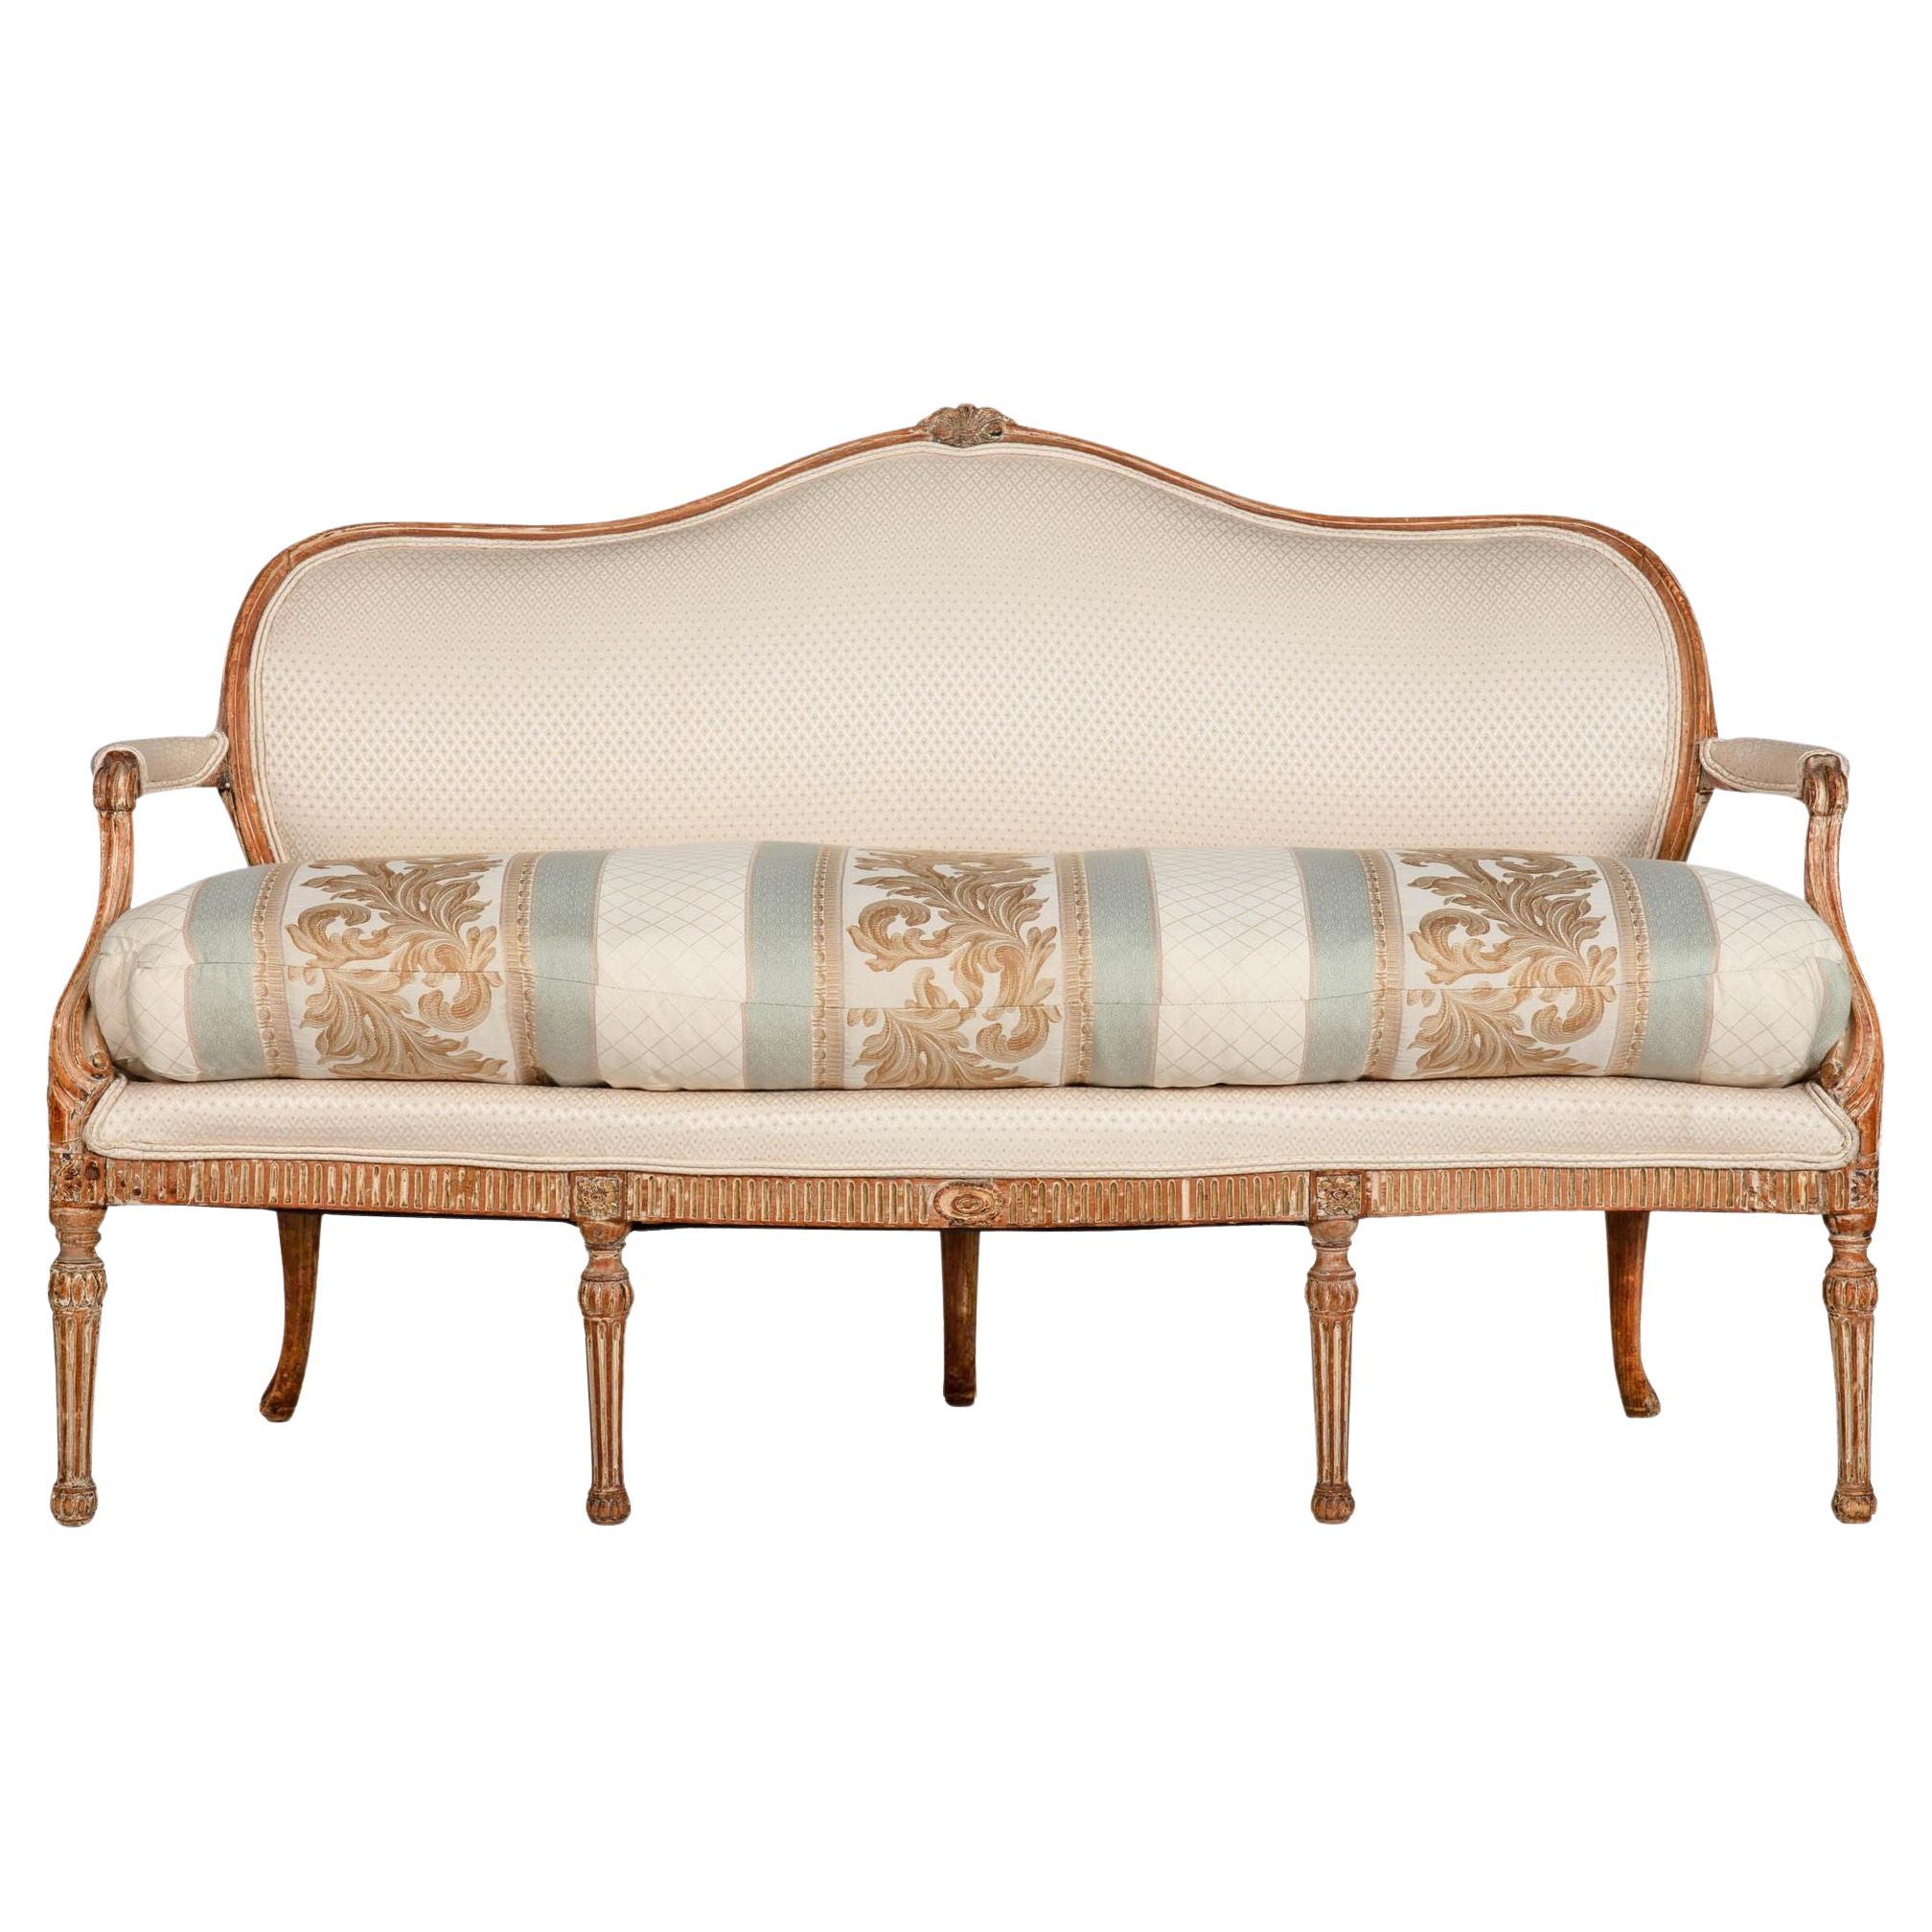 Circa 1780 Antique French Louis XVI Carved Settee Sofa Canapé For Sale